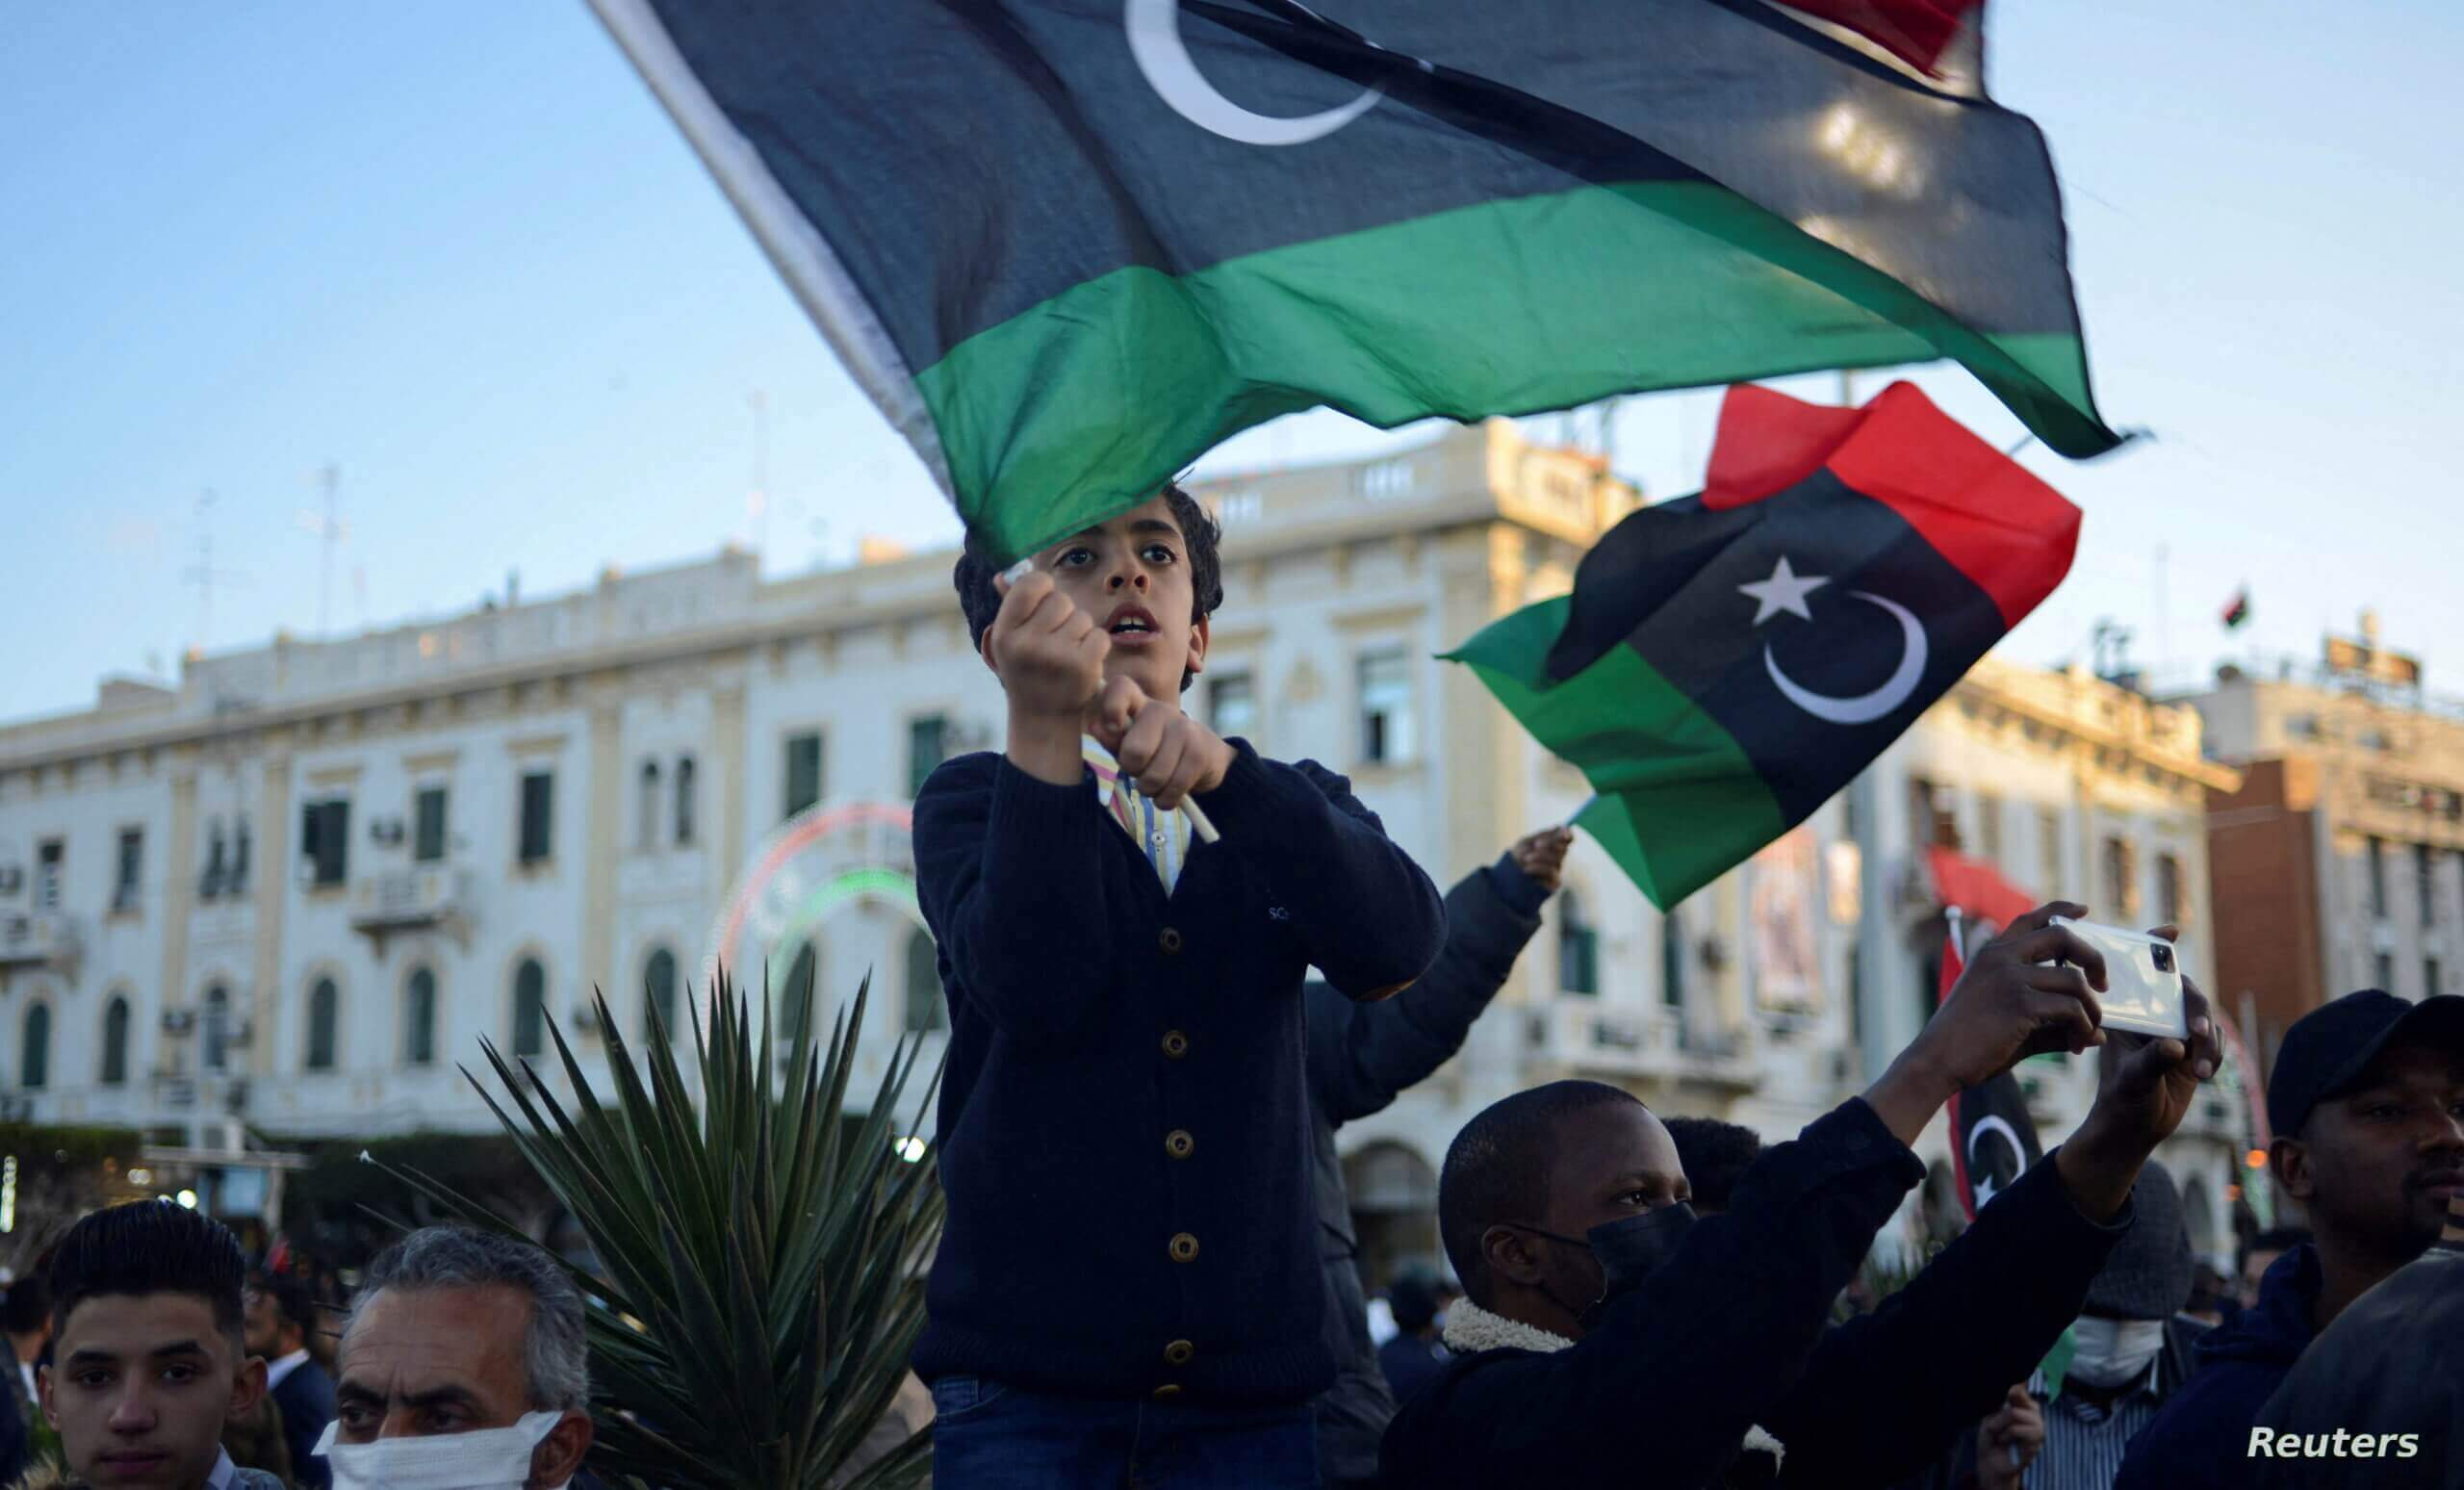 The "Libyan citizen" suffers and pays alone the bill for the crisis that is afflicting the country